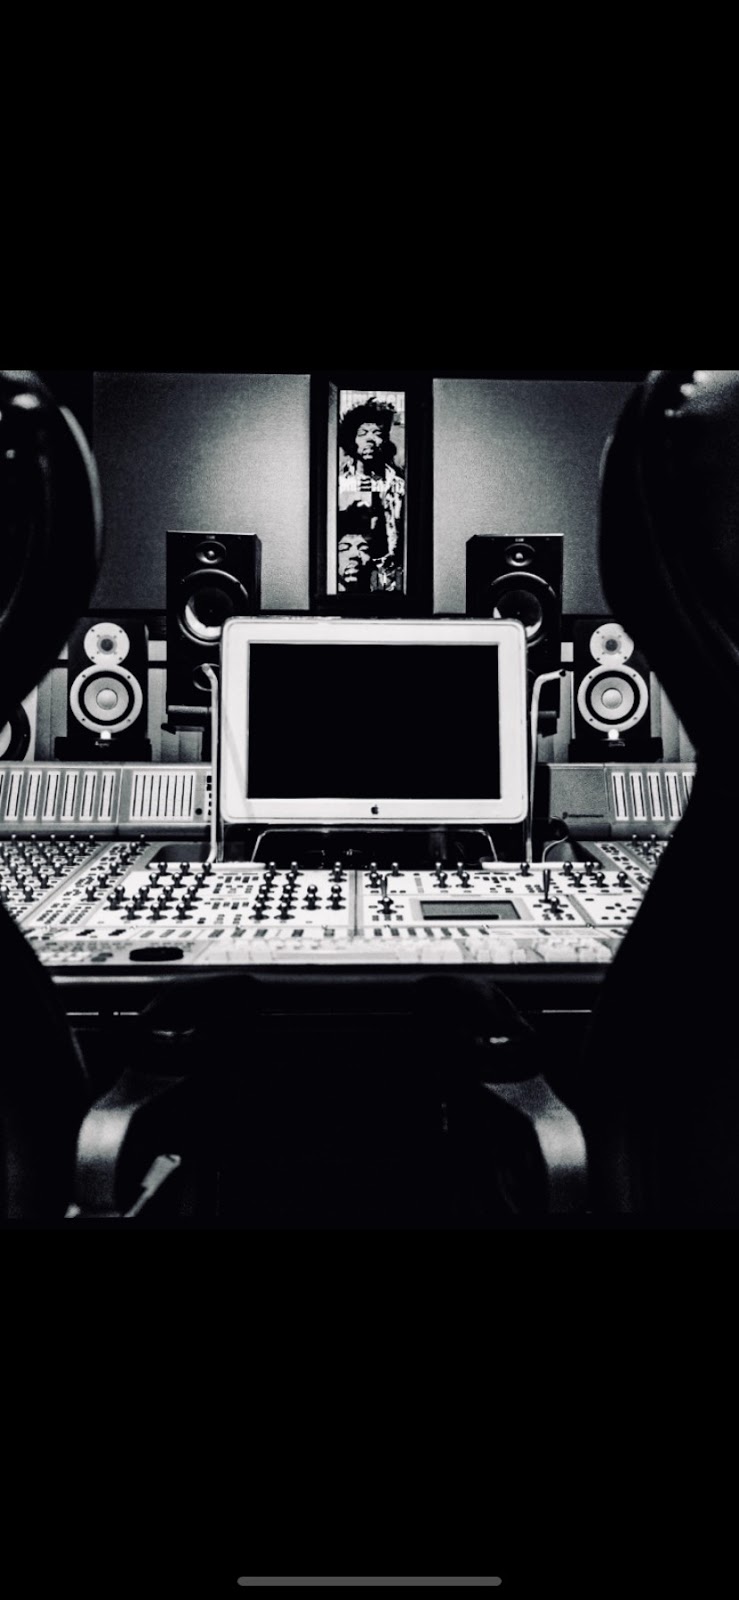 Sonic Kandy Mixing and Mastering Recording Studio | 18 Clifton St, Old Lyme, CT 06371 | Phone: (860) 451-9743